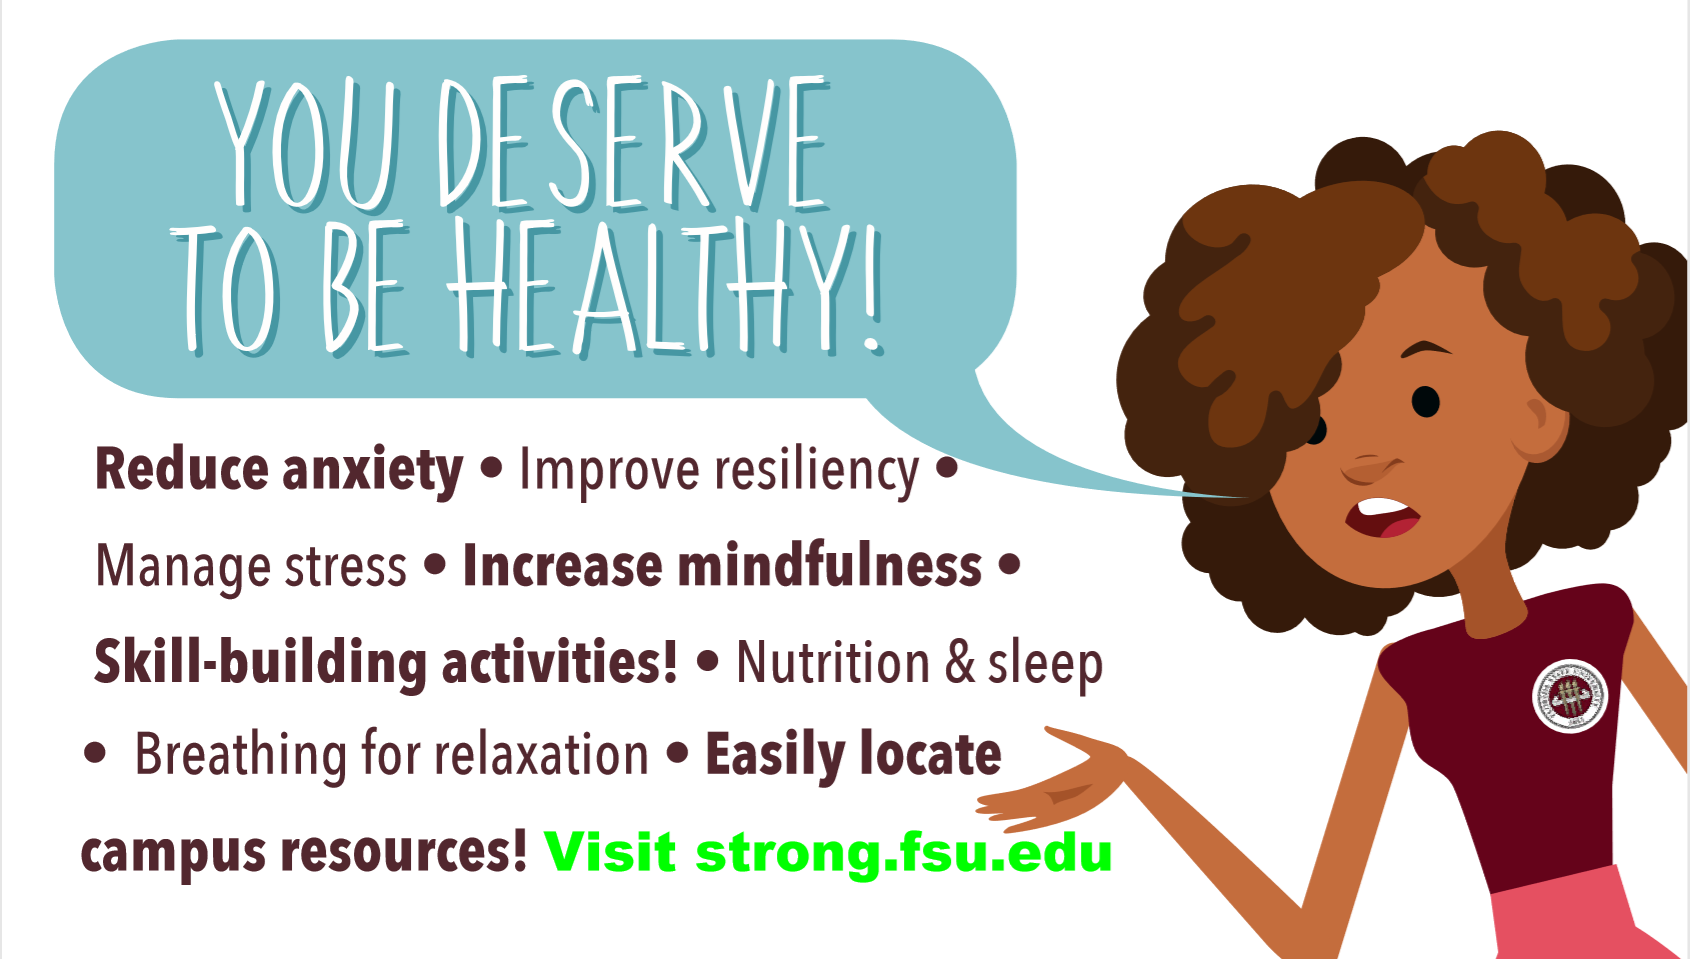 "Graphic of a cartoon person saying in a speech bubble You Deserve to Be Healthy and advising to visit the website. strong.fsu.edu."